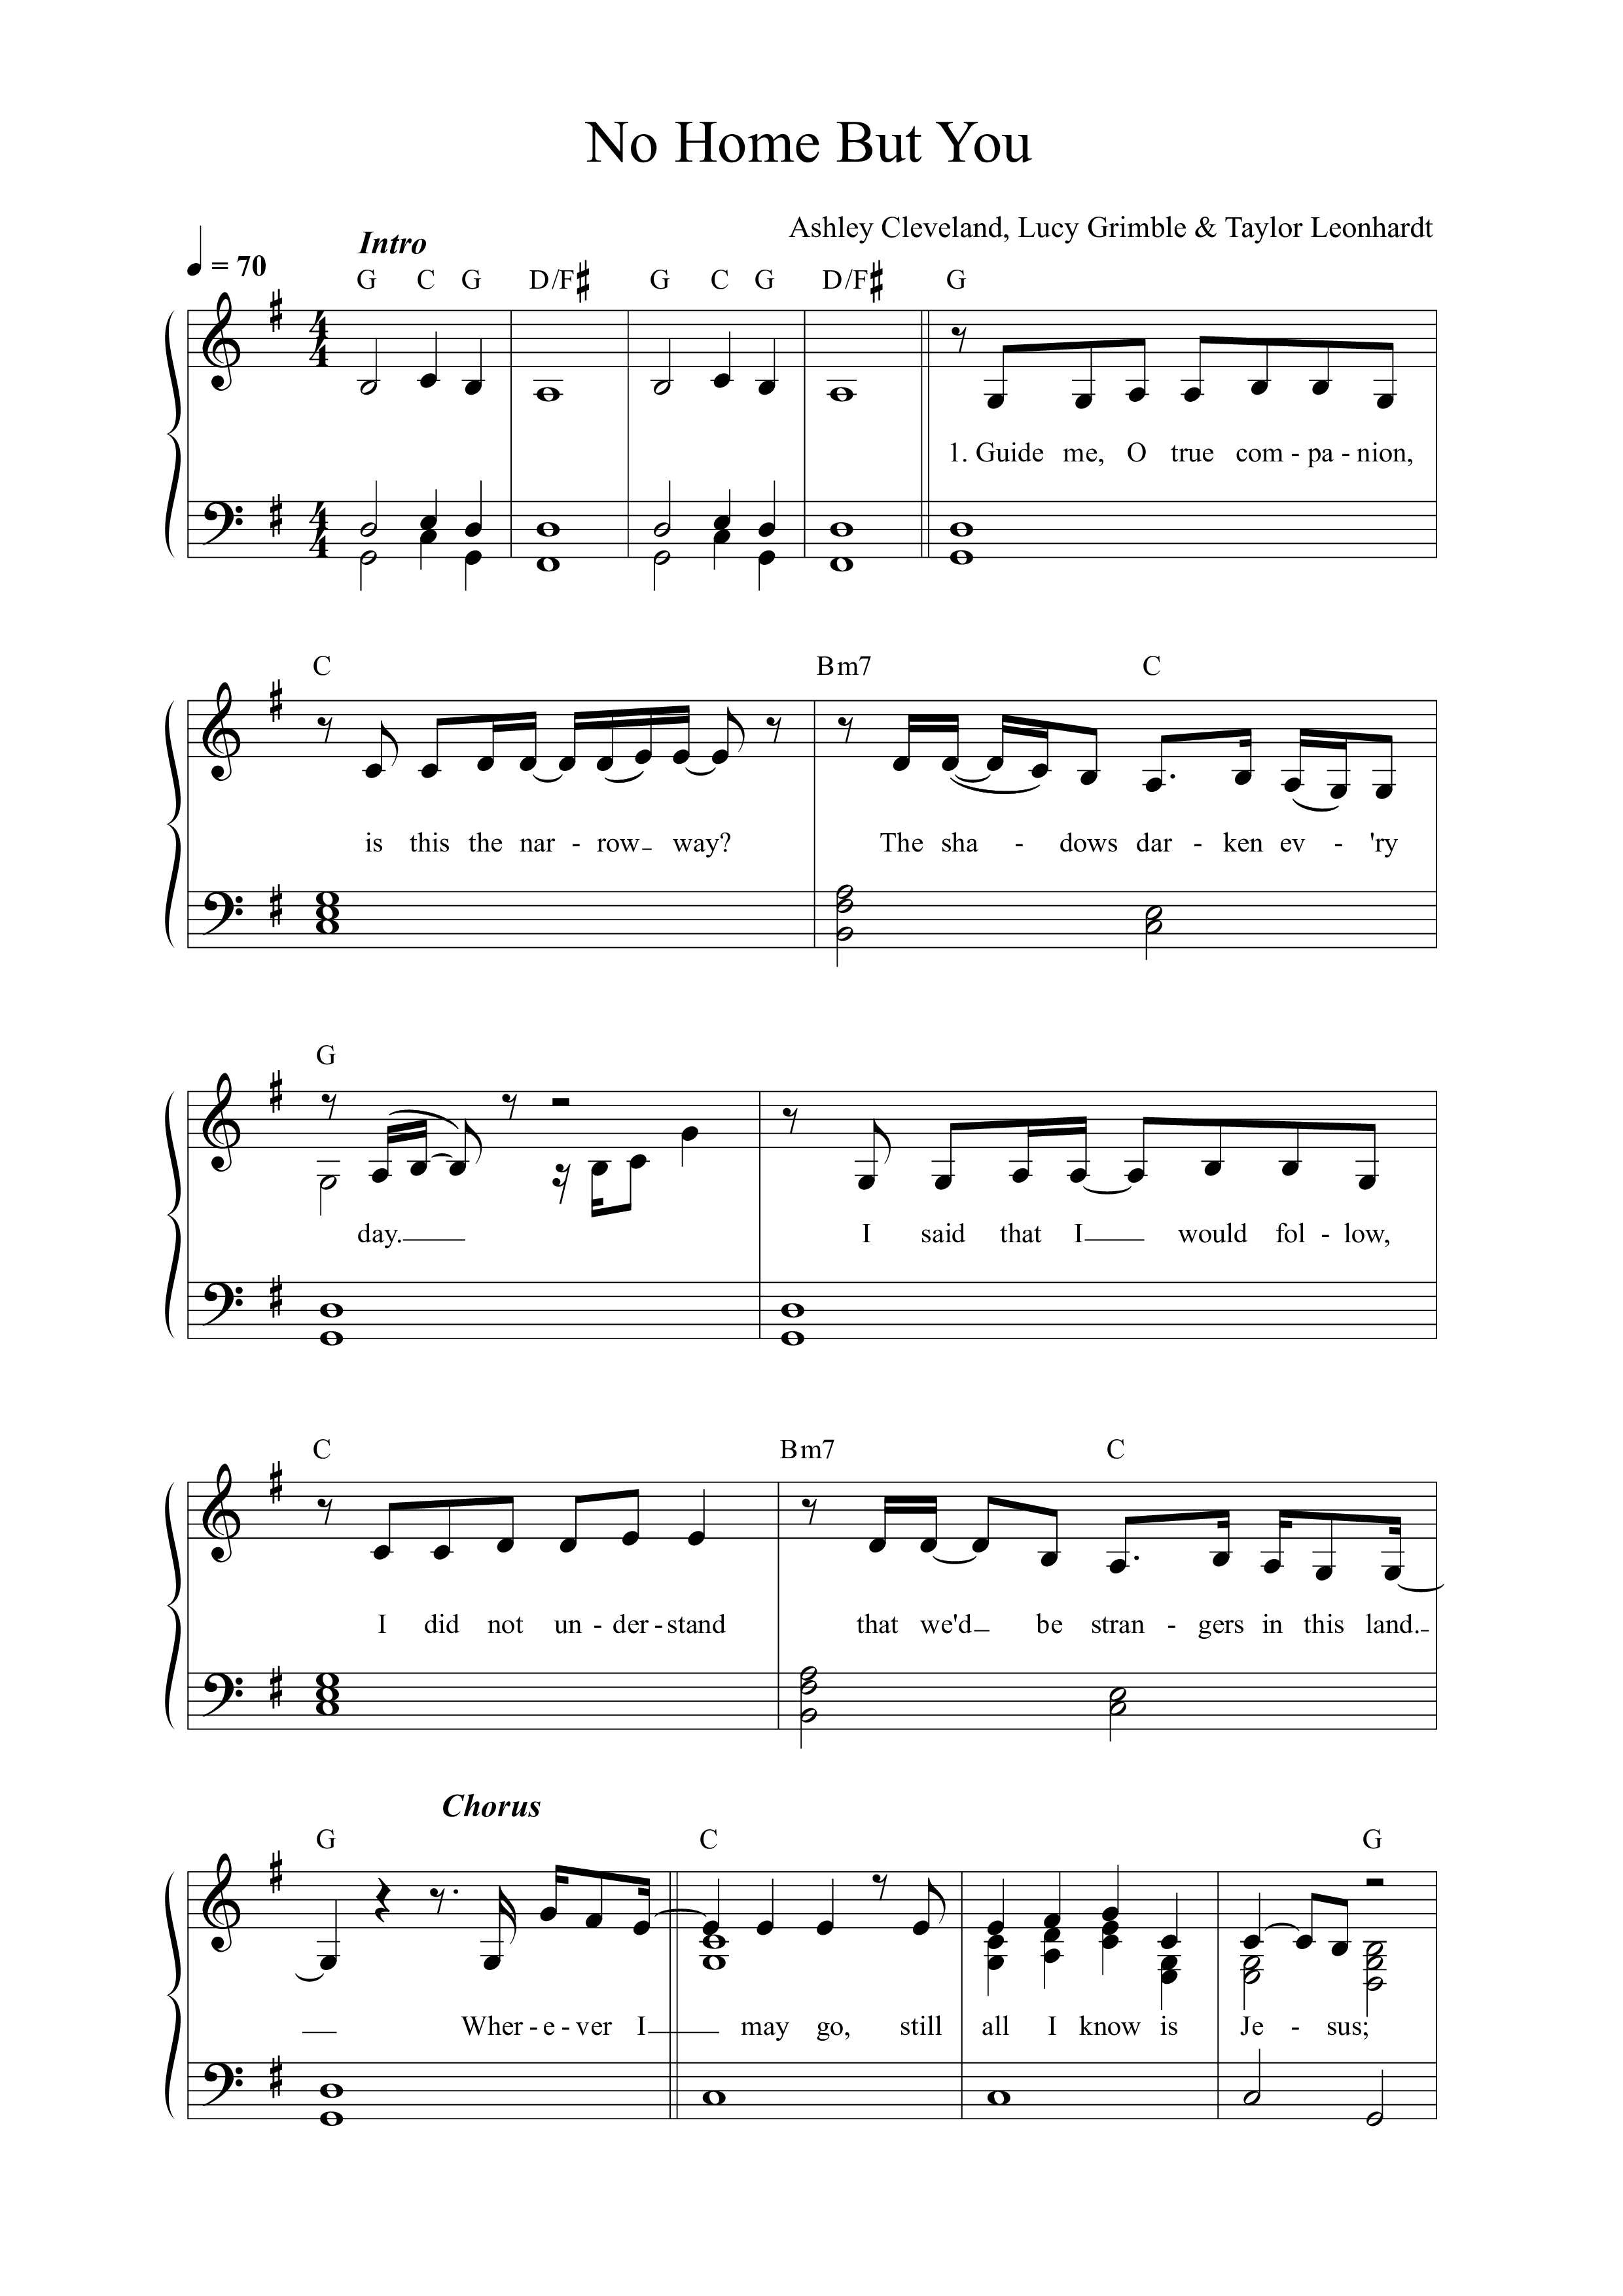 No Home But You Lead Sheet Melody (Anchor Hymns / Taylor Leonhardt / Ashley Cleveland / Citizens)